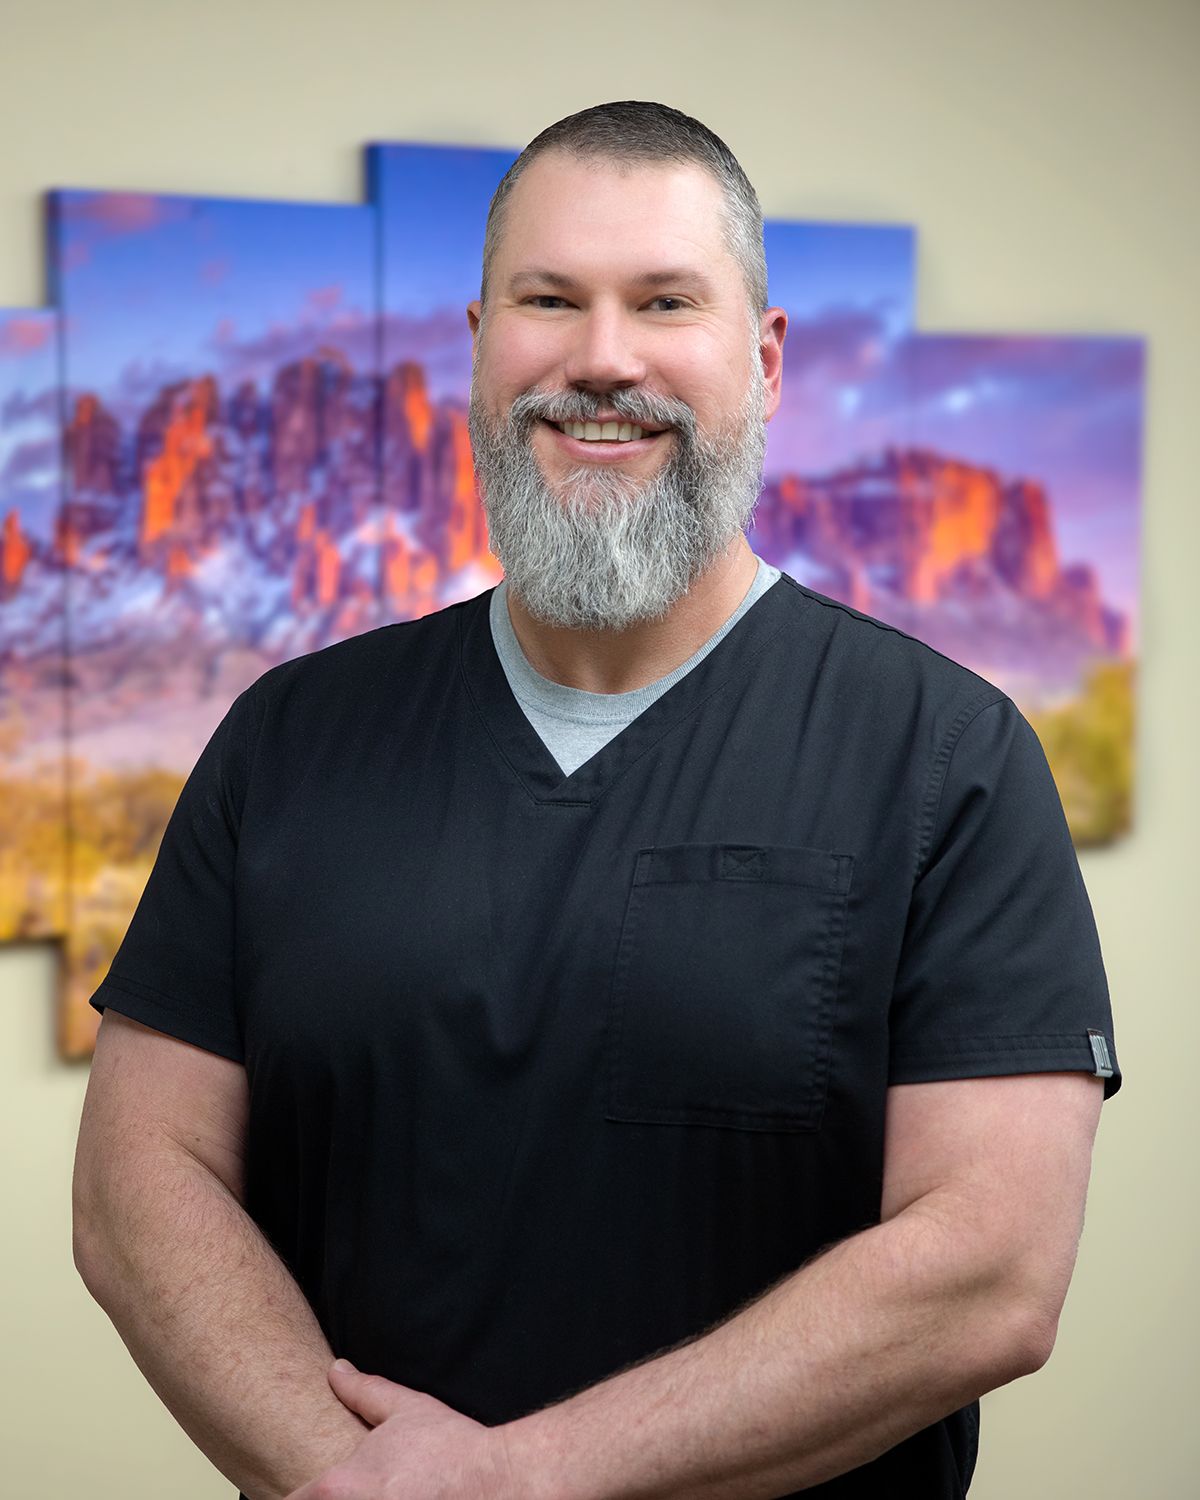 A man with a beard is wearing a black scrub top and smiling.